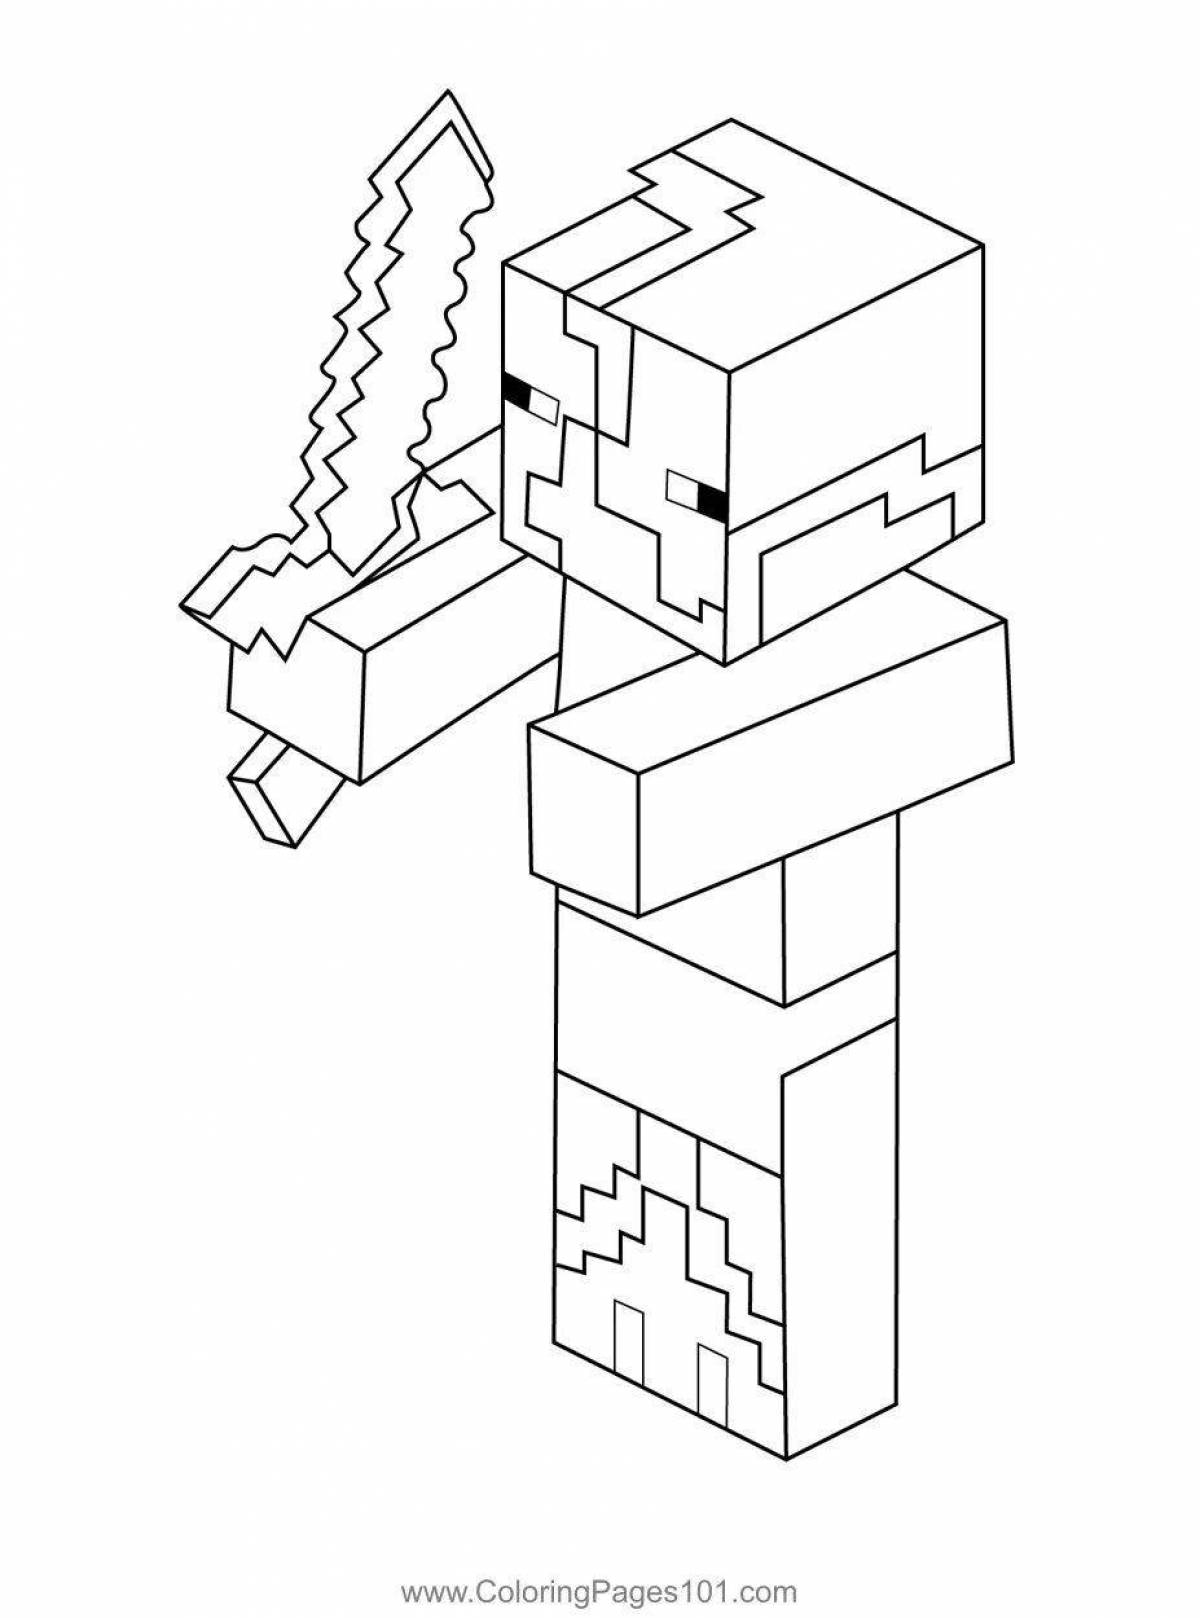 Gorgeous minecraft workbench coloring page